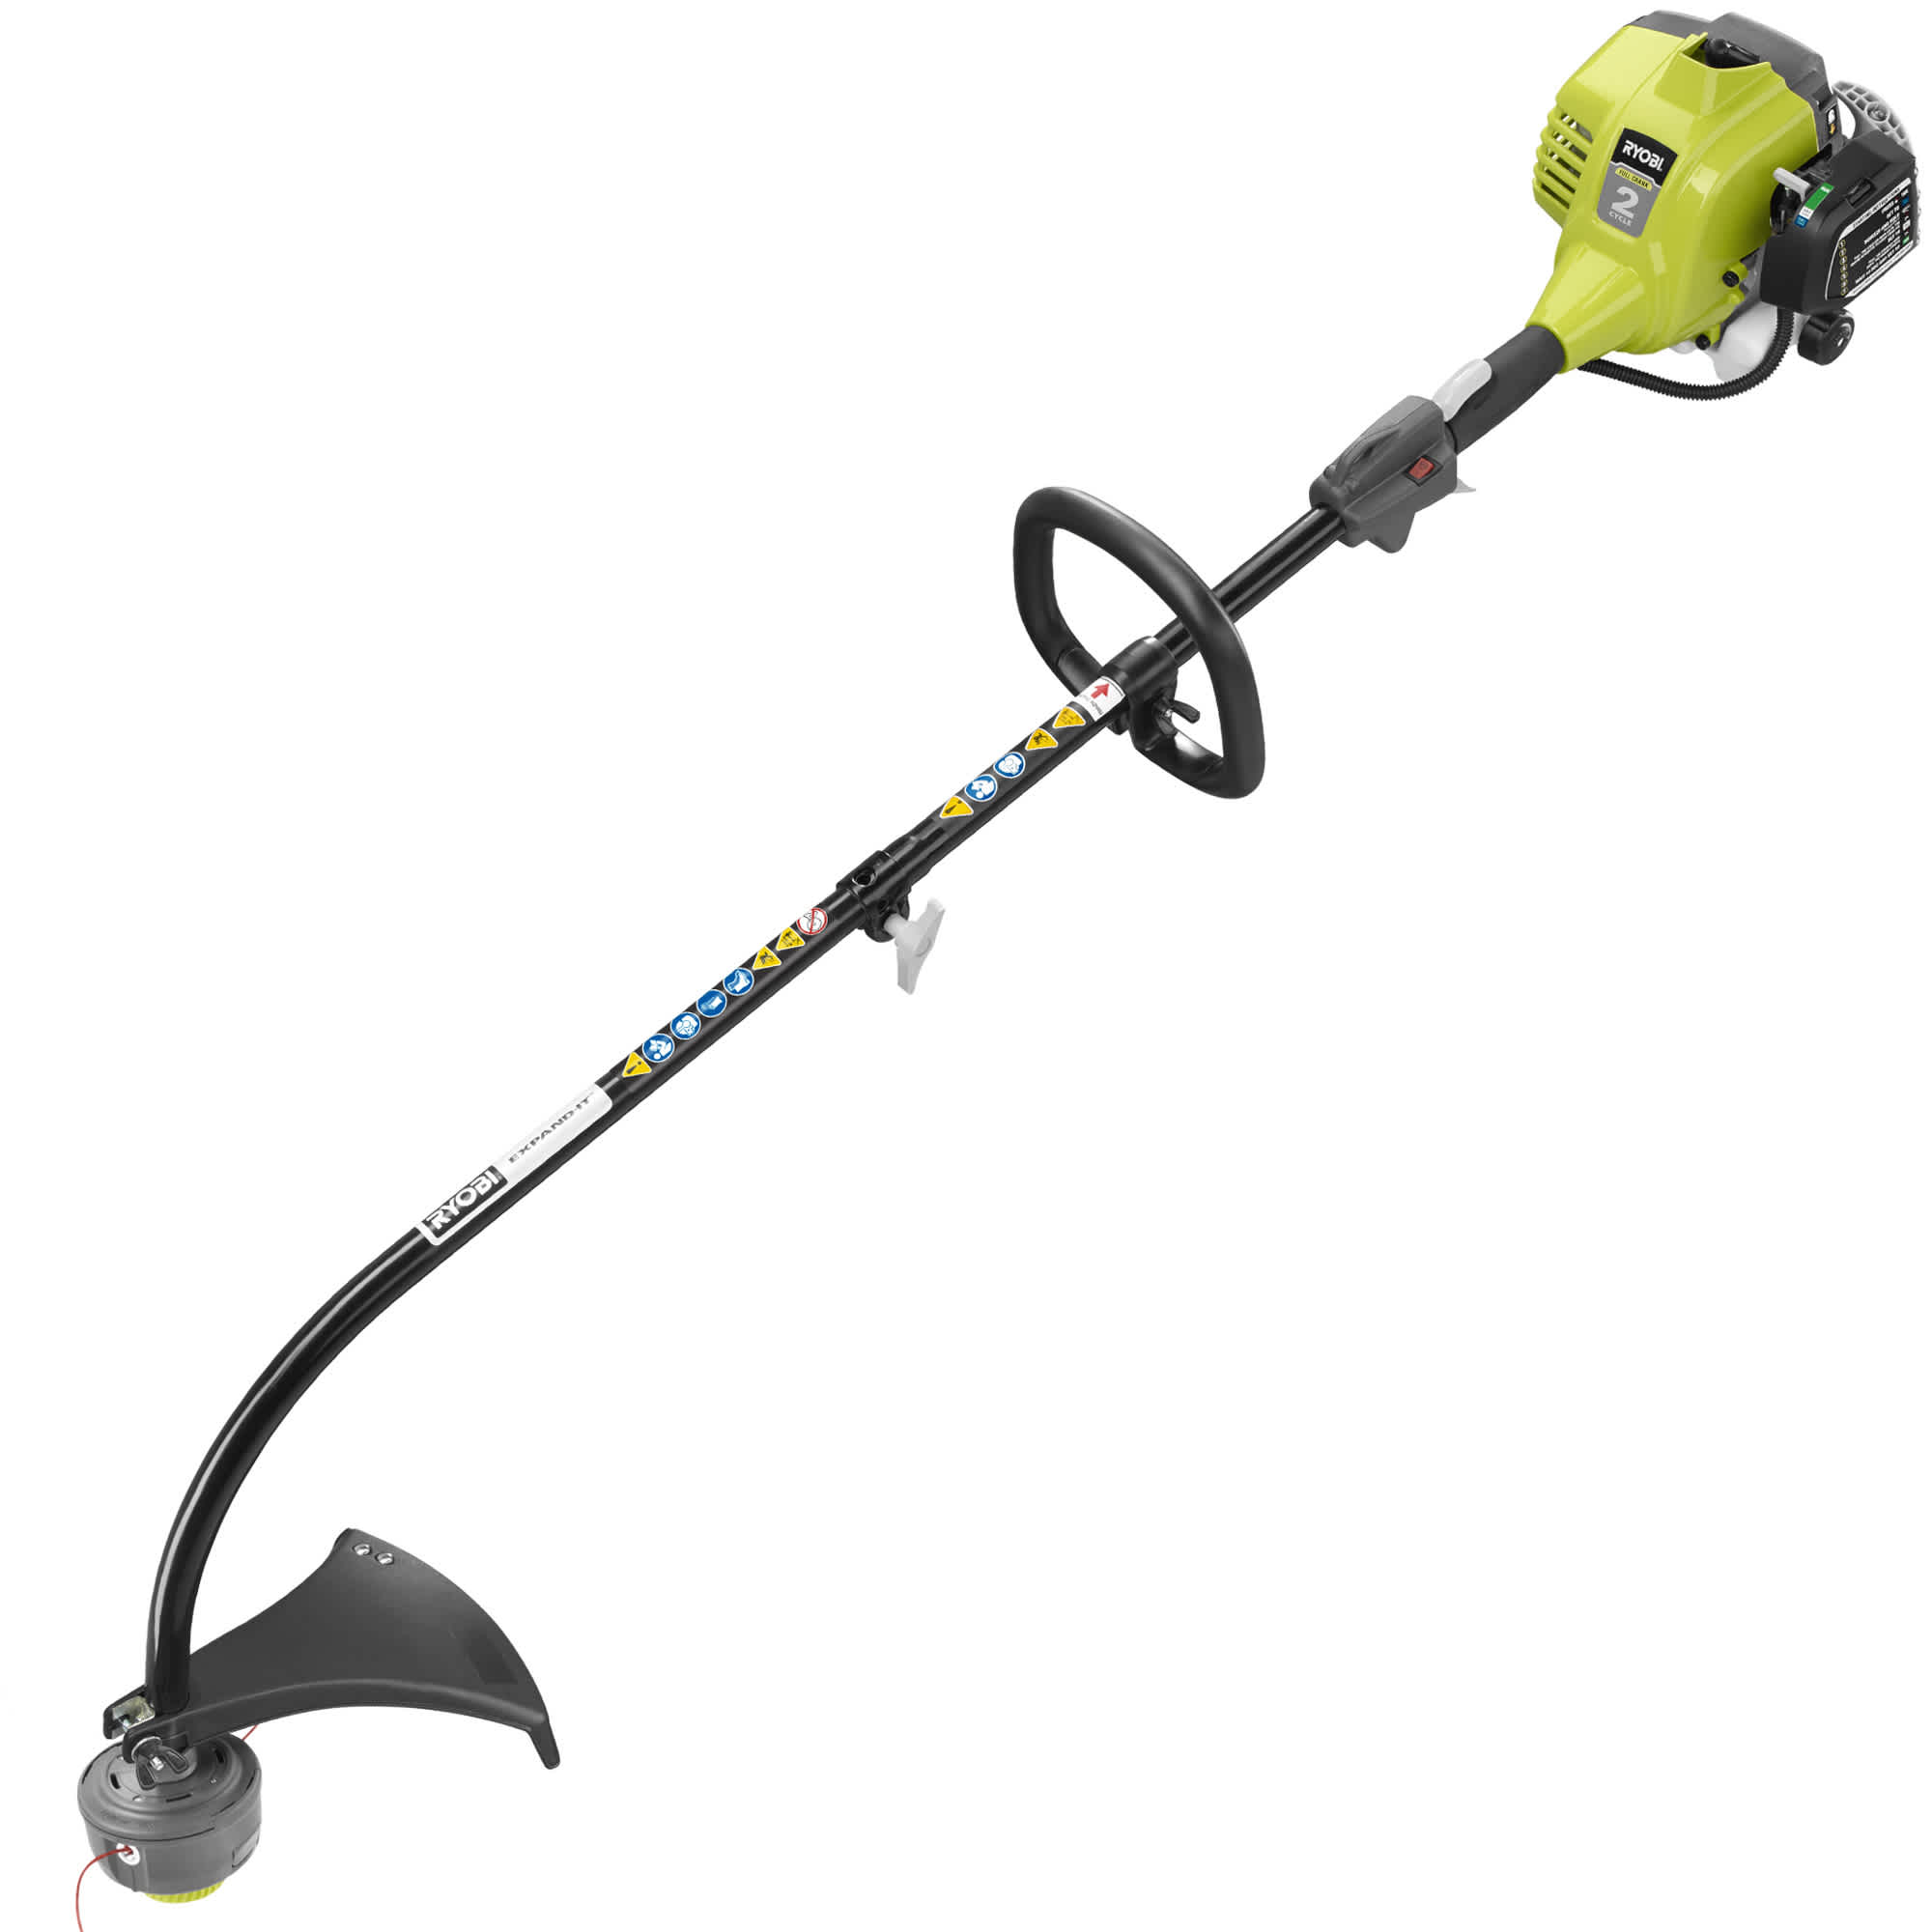 2 Cycle Full Crank Curved Shaft String Trimmer